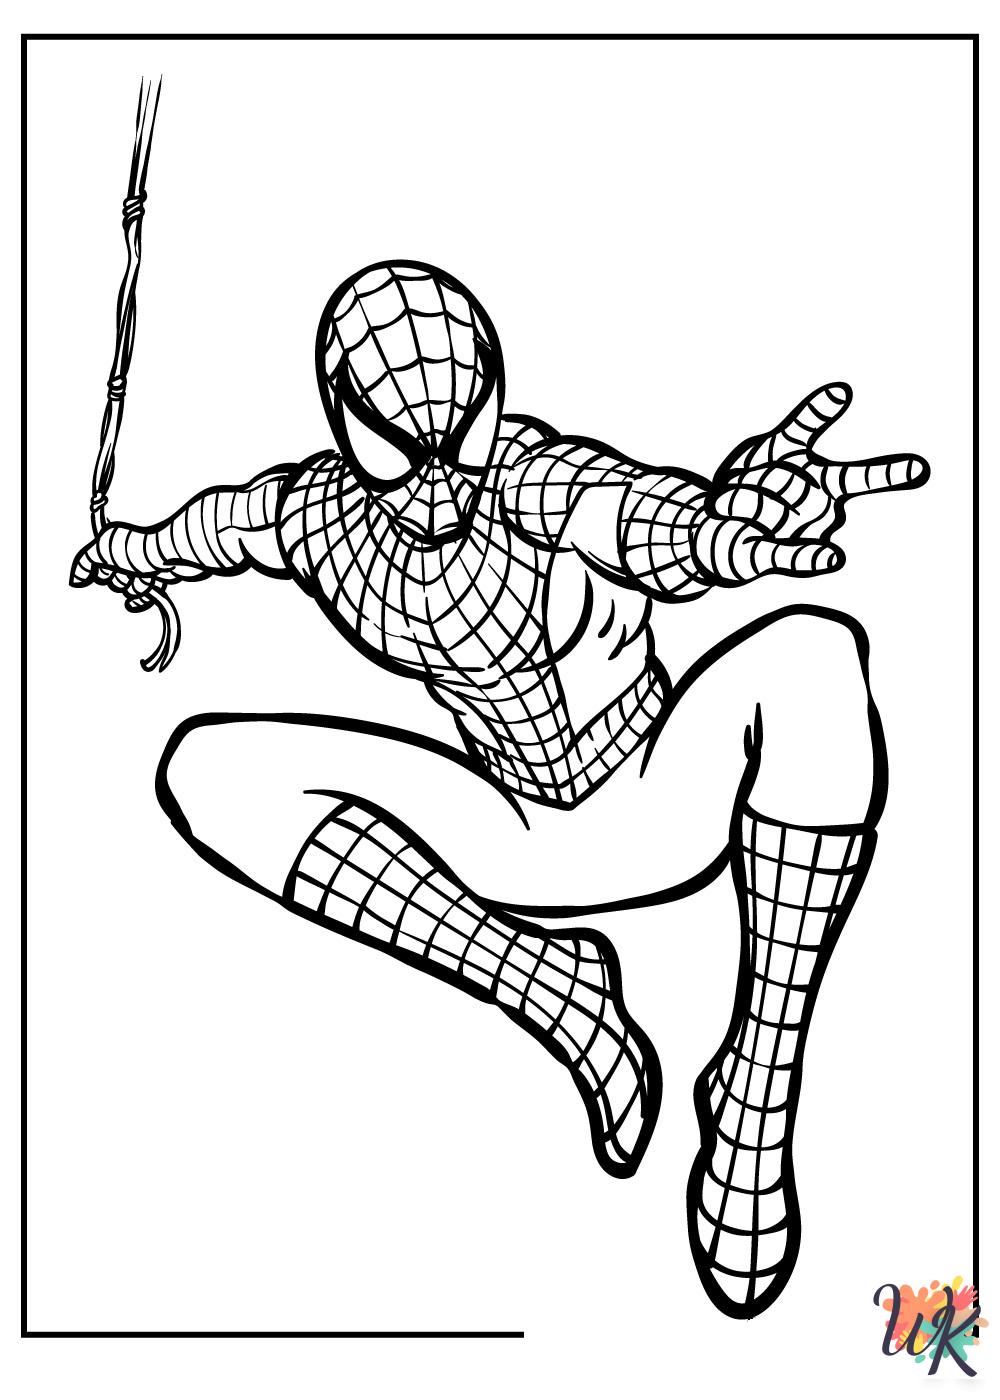 Superhero ornament coloring pages